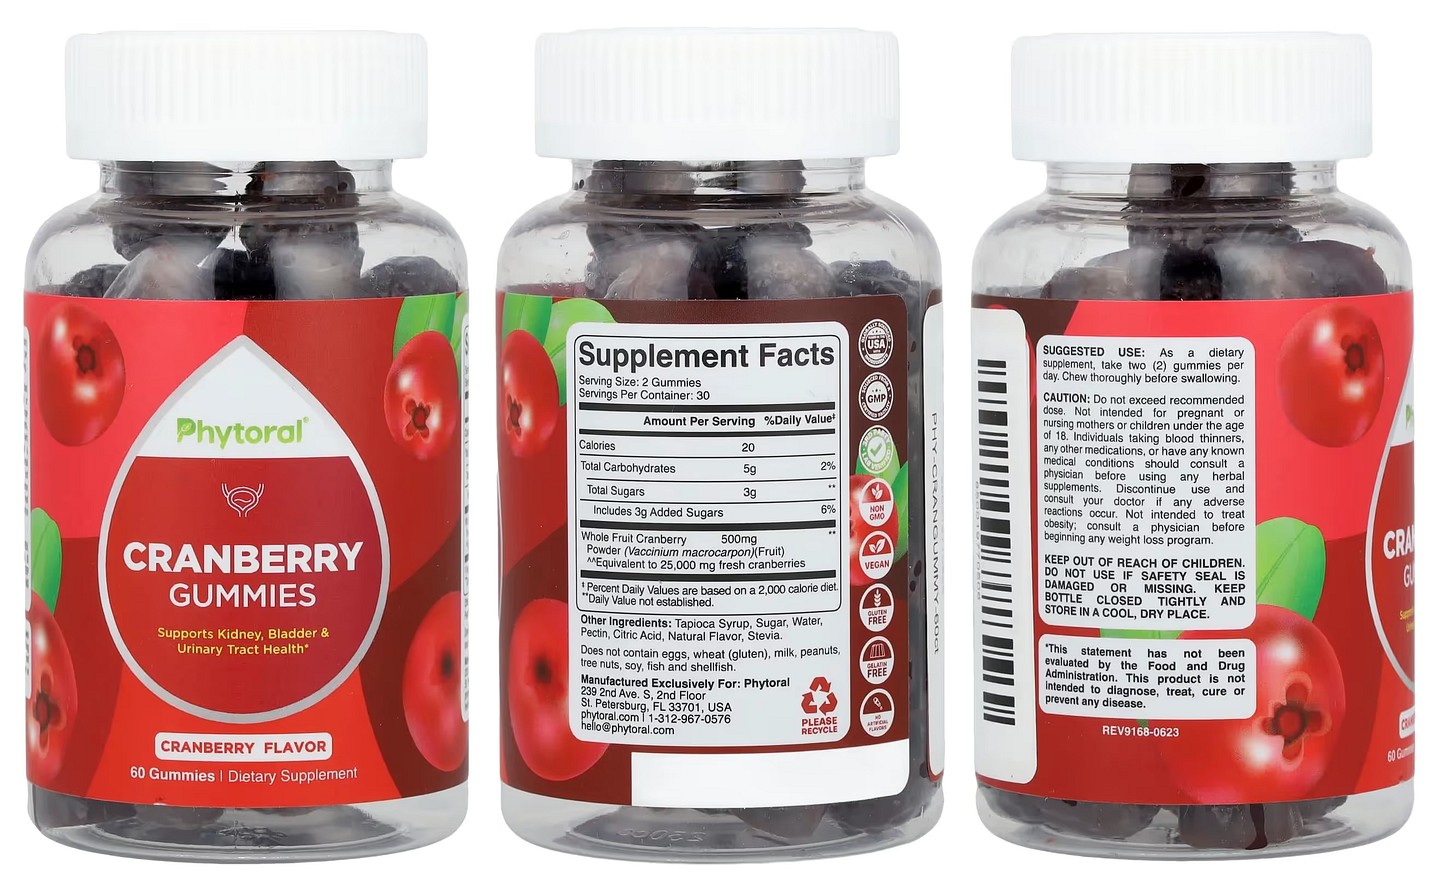 Phytoral, Cranberry Gummies packaging